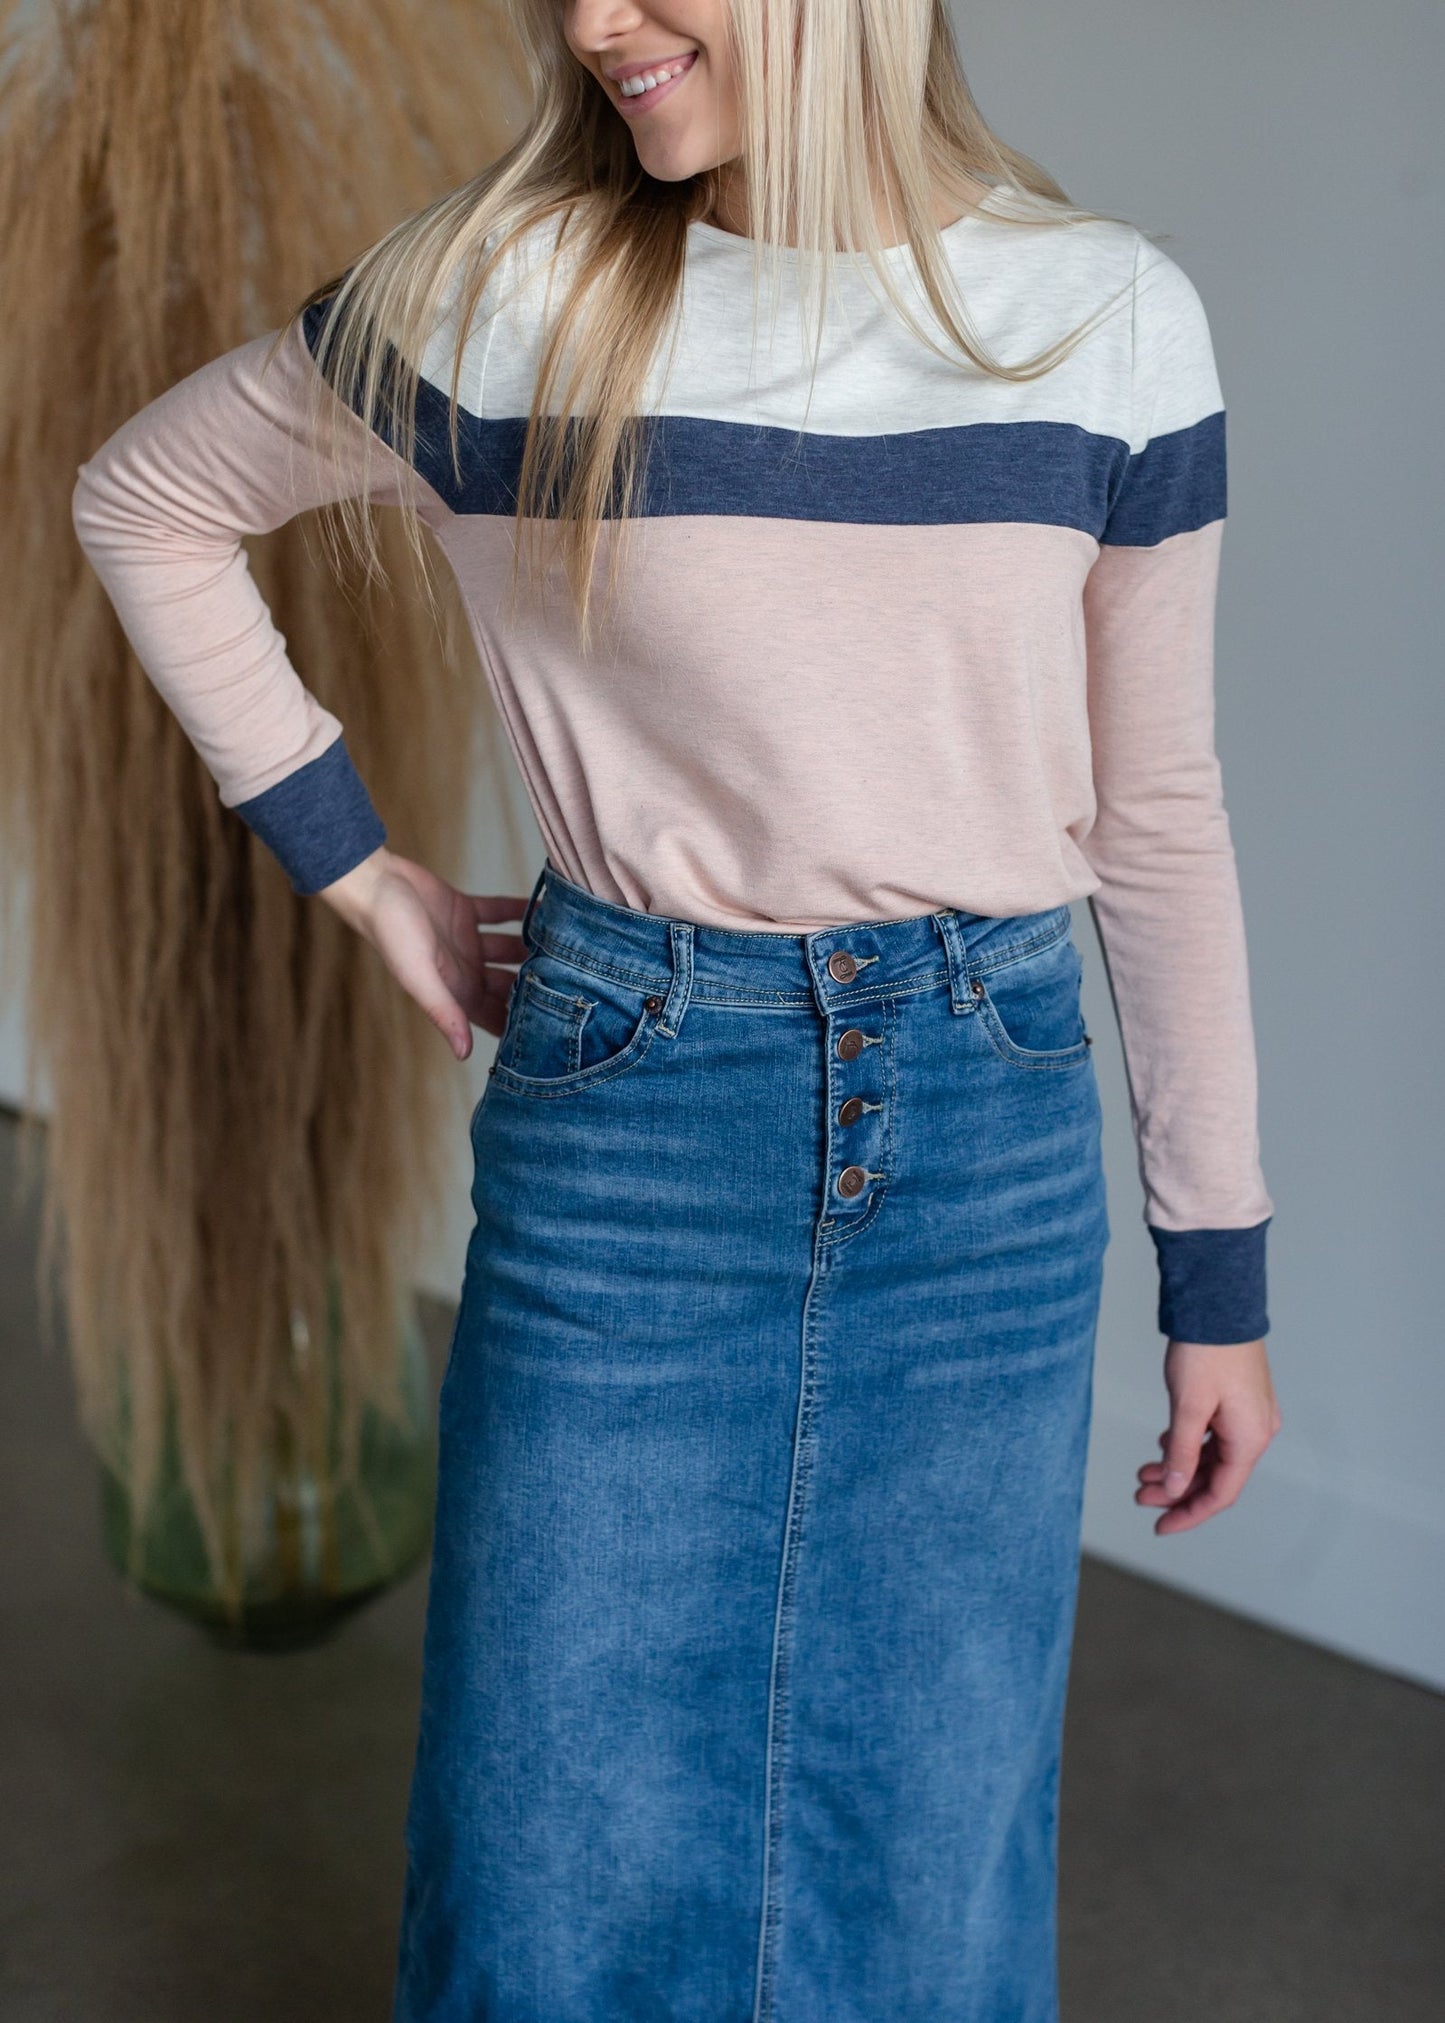 Blush Boatneck Colorblock Top - FINAL SALE Tops Staccato